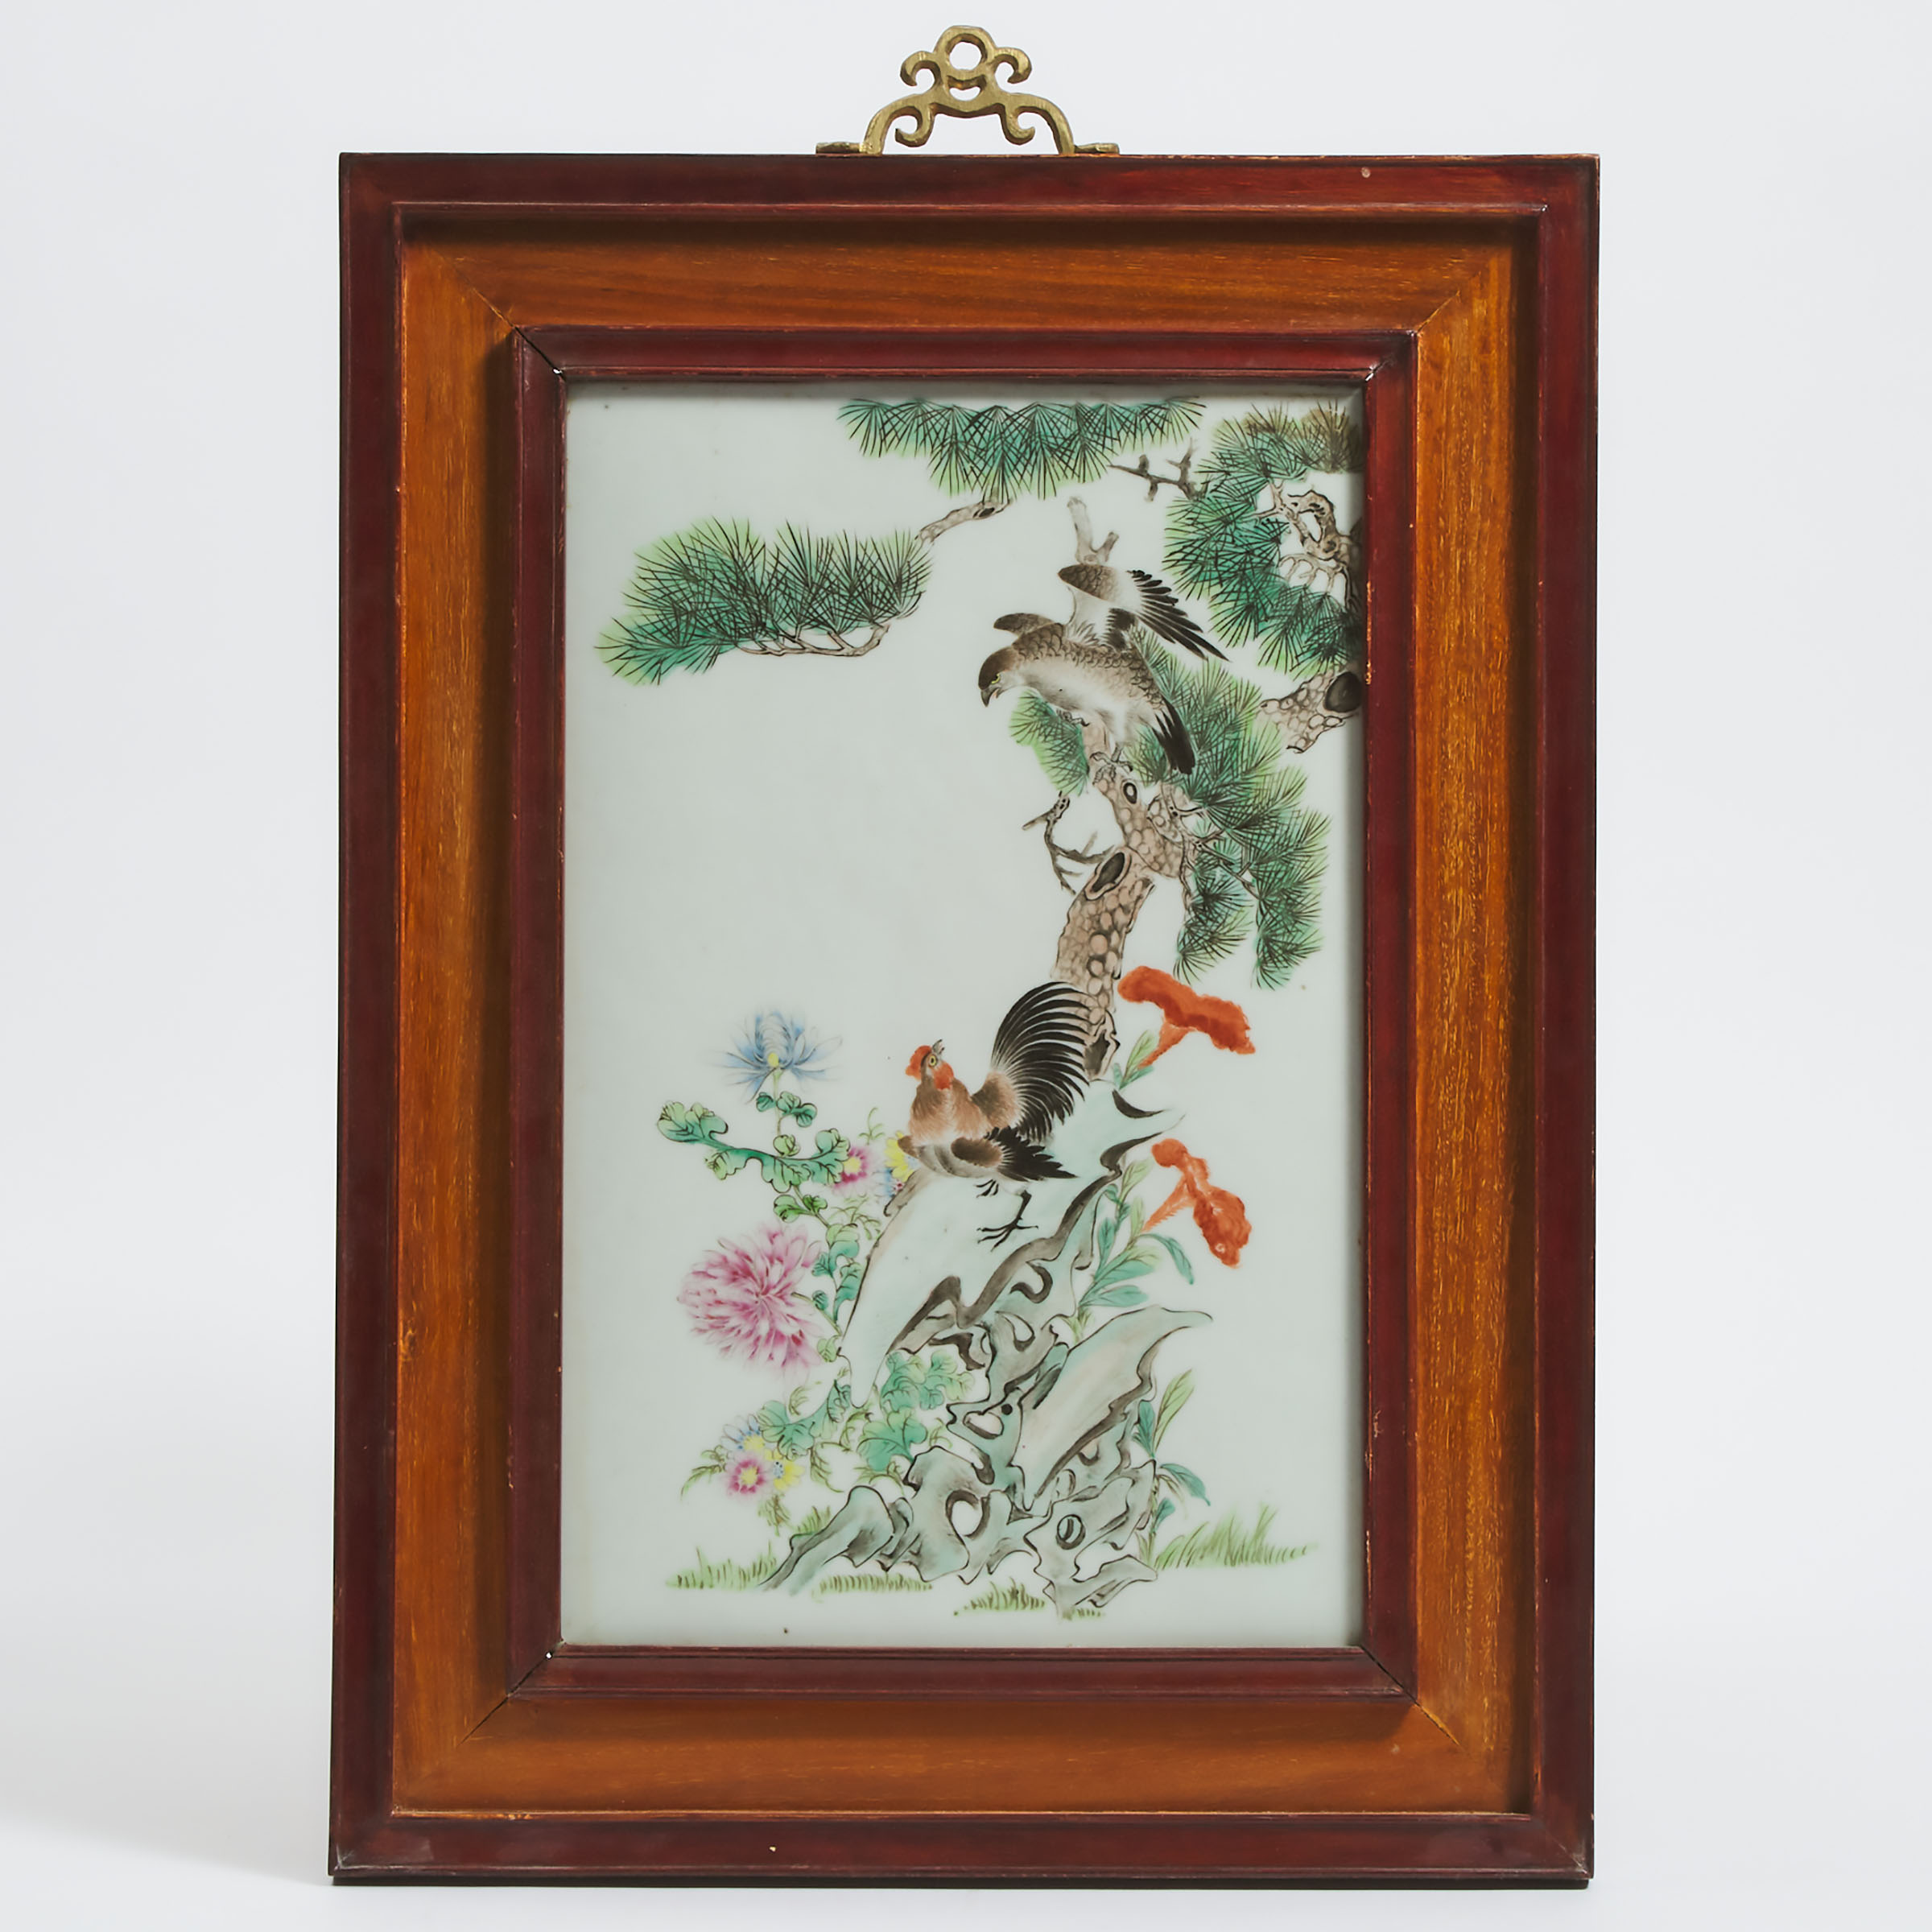 A Famille Rose Porcelain Plaque of a Rooster and a Hawk, Early to Mid 20th Century